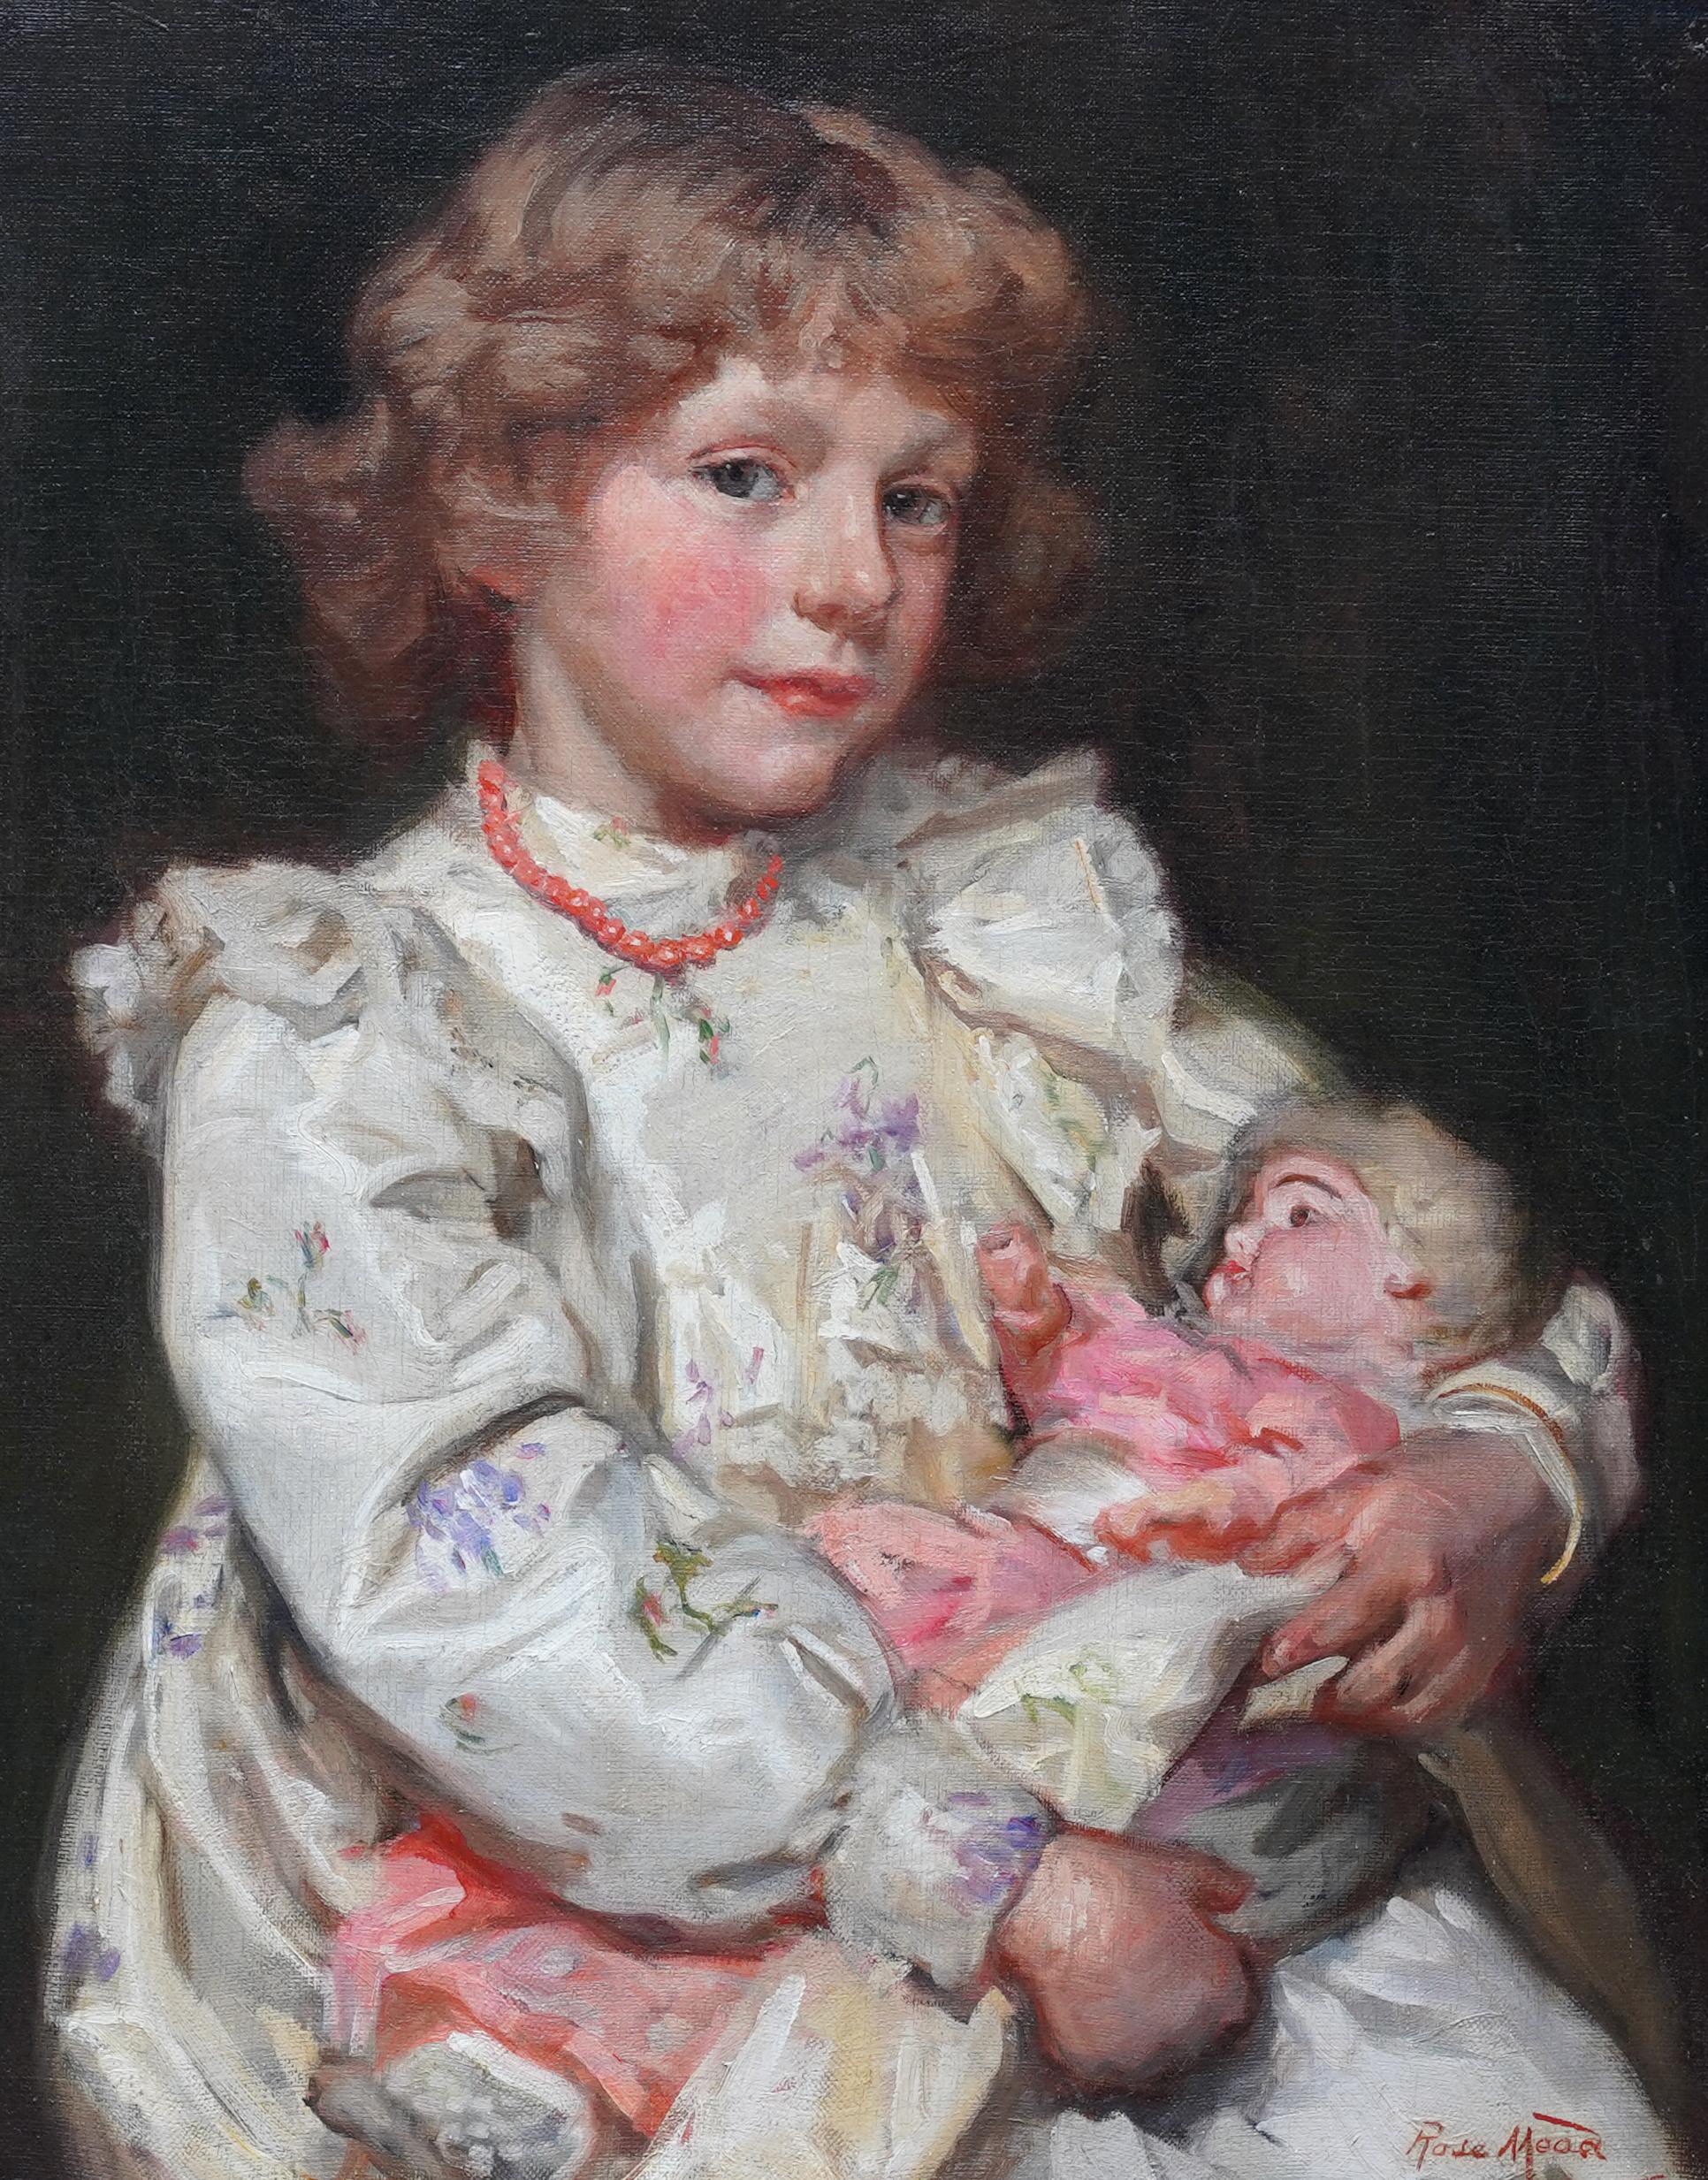 Portrait of a Girl with Doll - British Edwardian art portrait oil painting - Realist Painting by Rose Mead